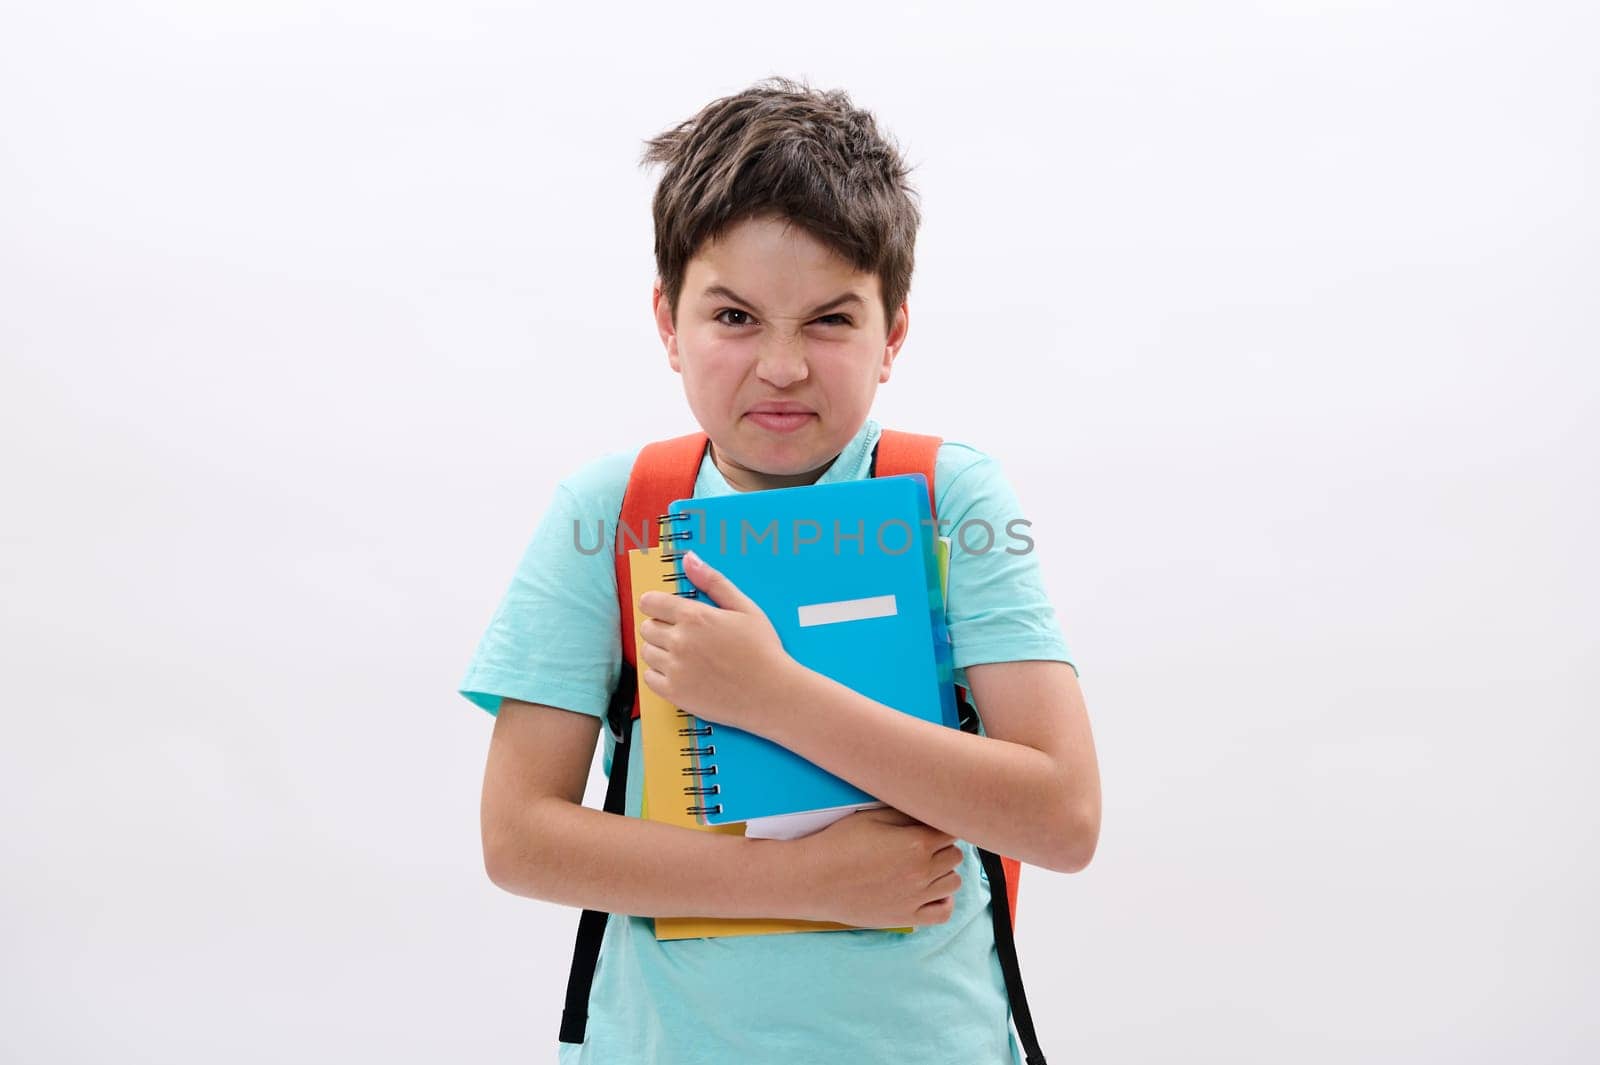 Irritated schoolboy holding workbooks, looking at camera, expressing negative emotions, frustration and anger, feeling unhappy to start a new semester at school, isolated over white studio background